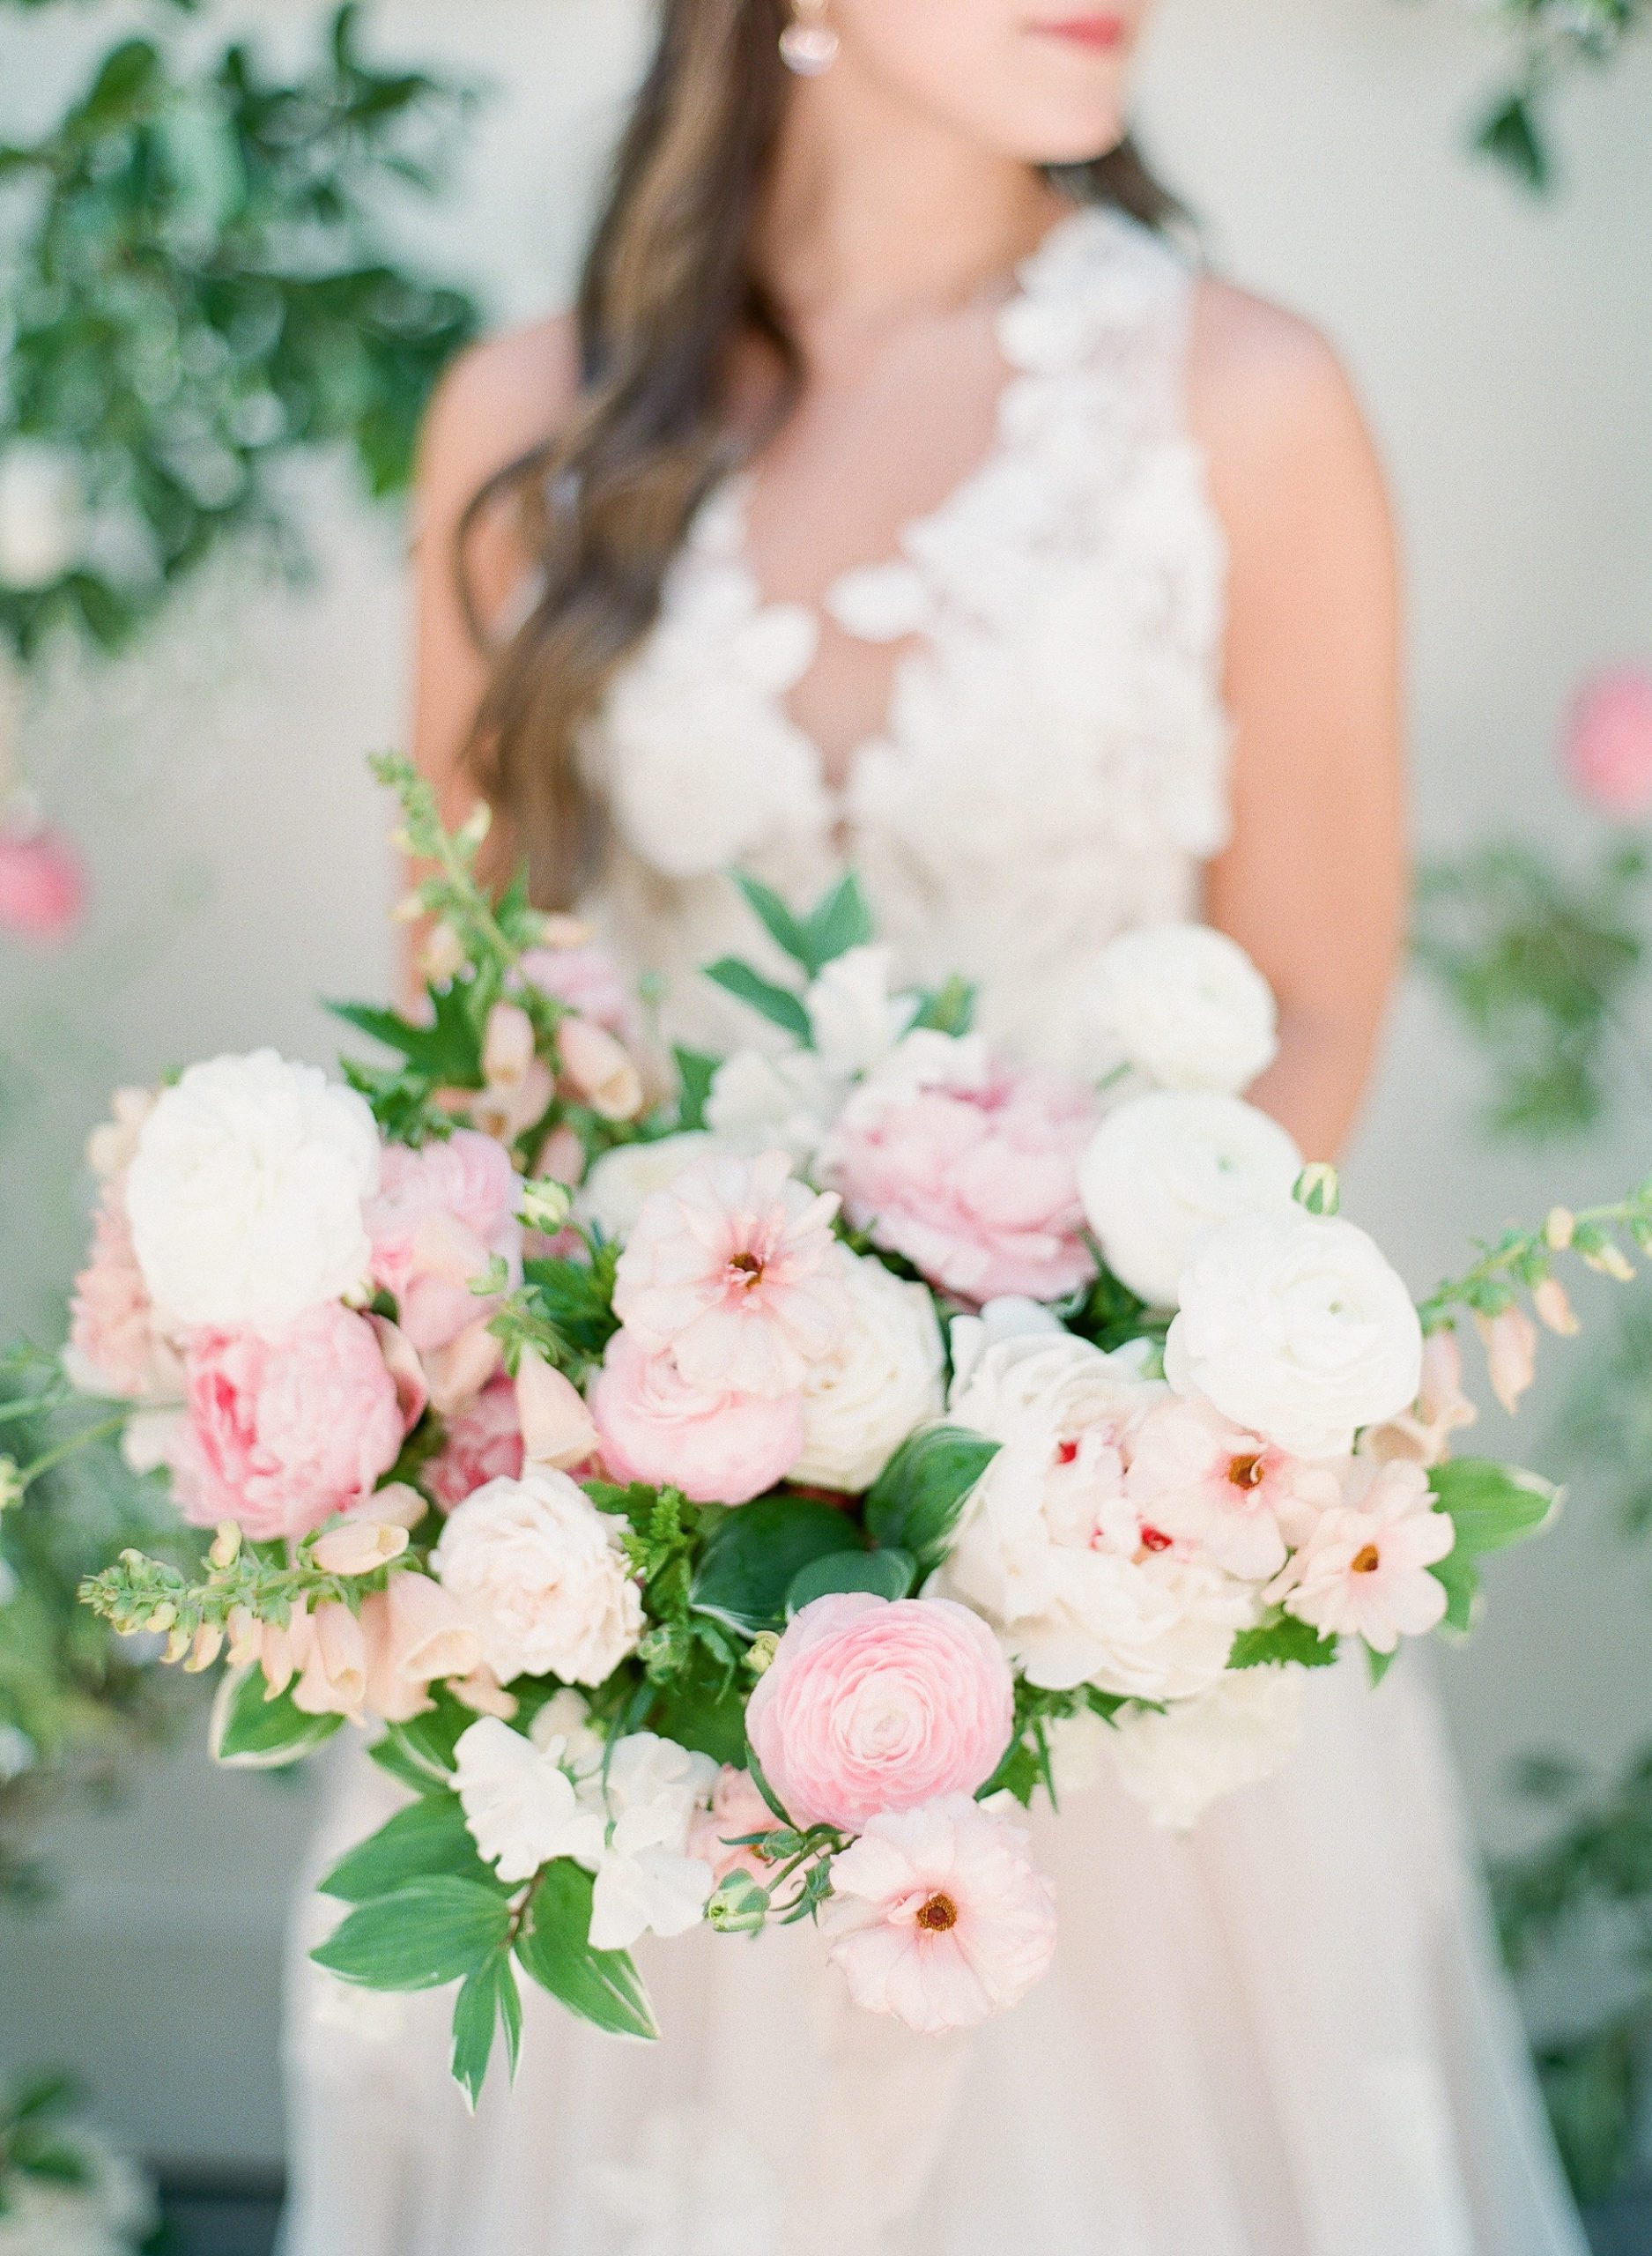 Wedding Bridal Bouquet Inspiration bride holding pink and white bridal bouquet photo